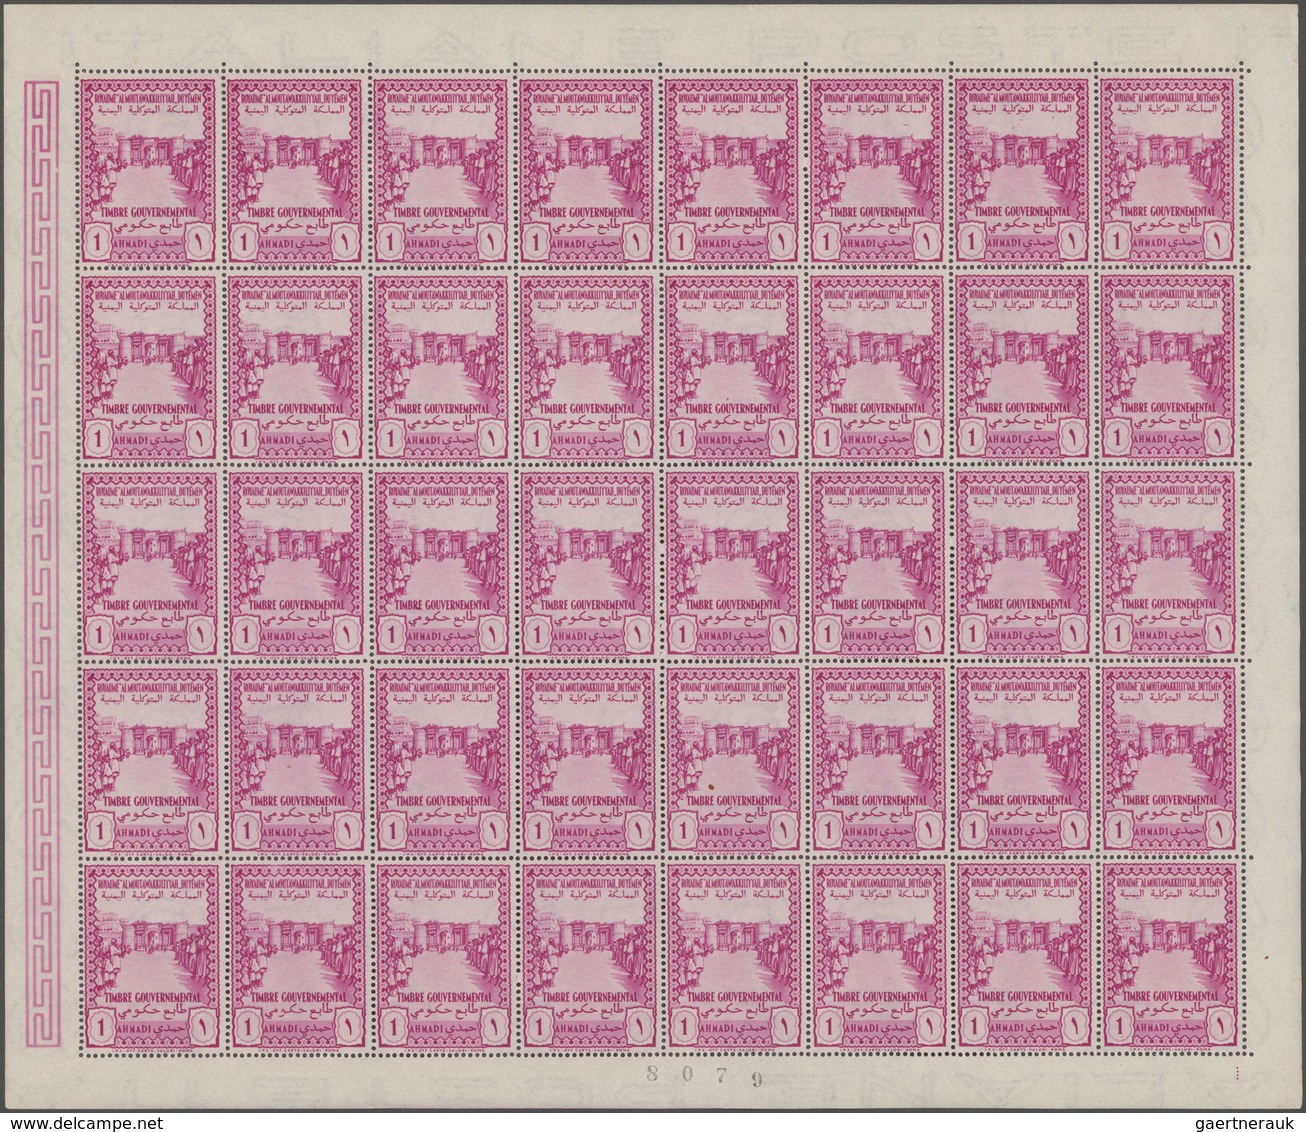 Jemen: 1958, 20b. And 1i. Not Issued Definitves In Complete Sheets Of 50 Stamps Each Mint Never Hing - Yemen